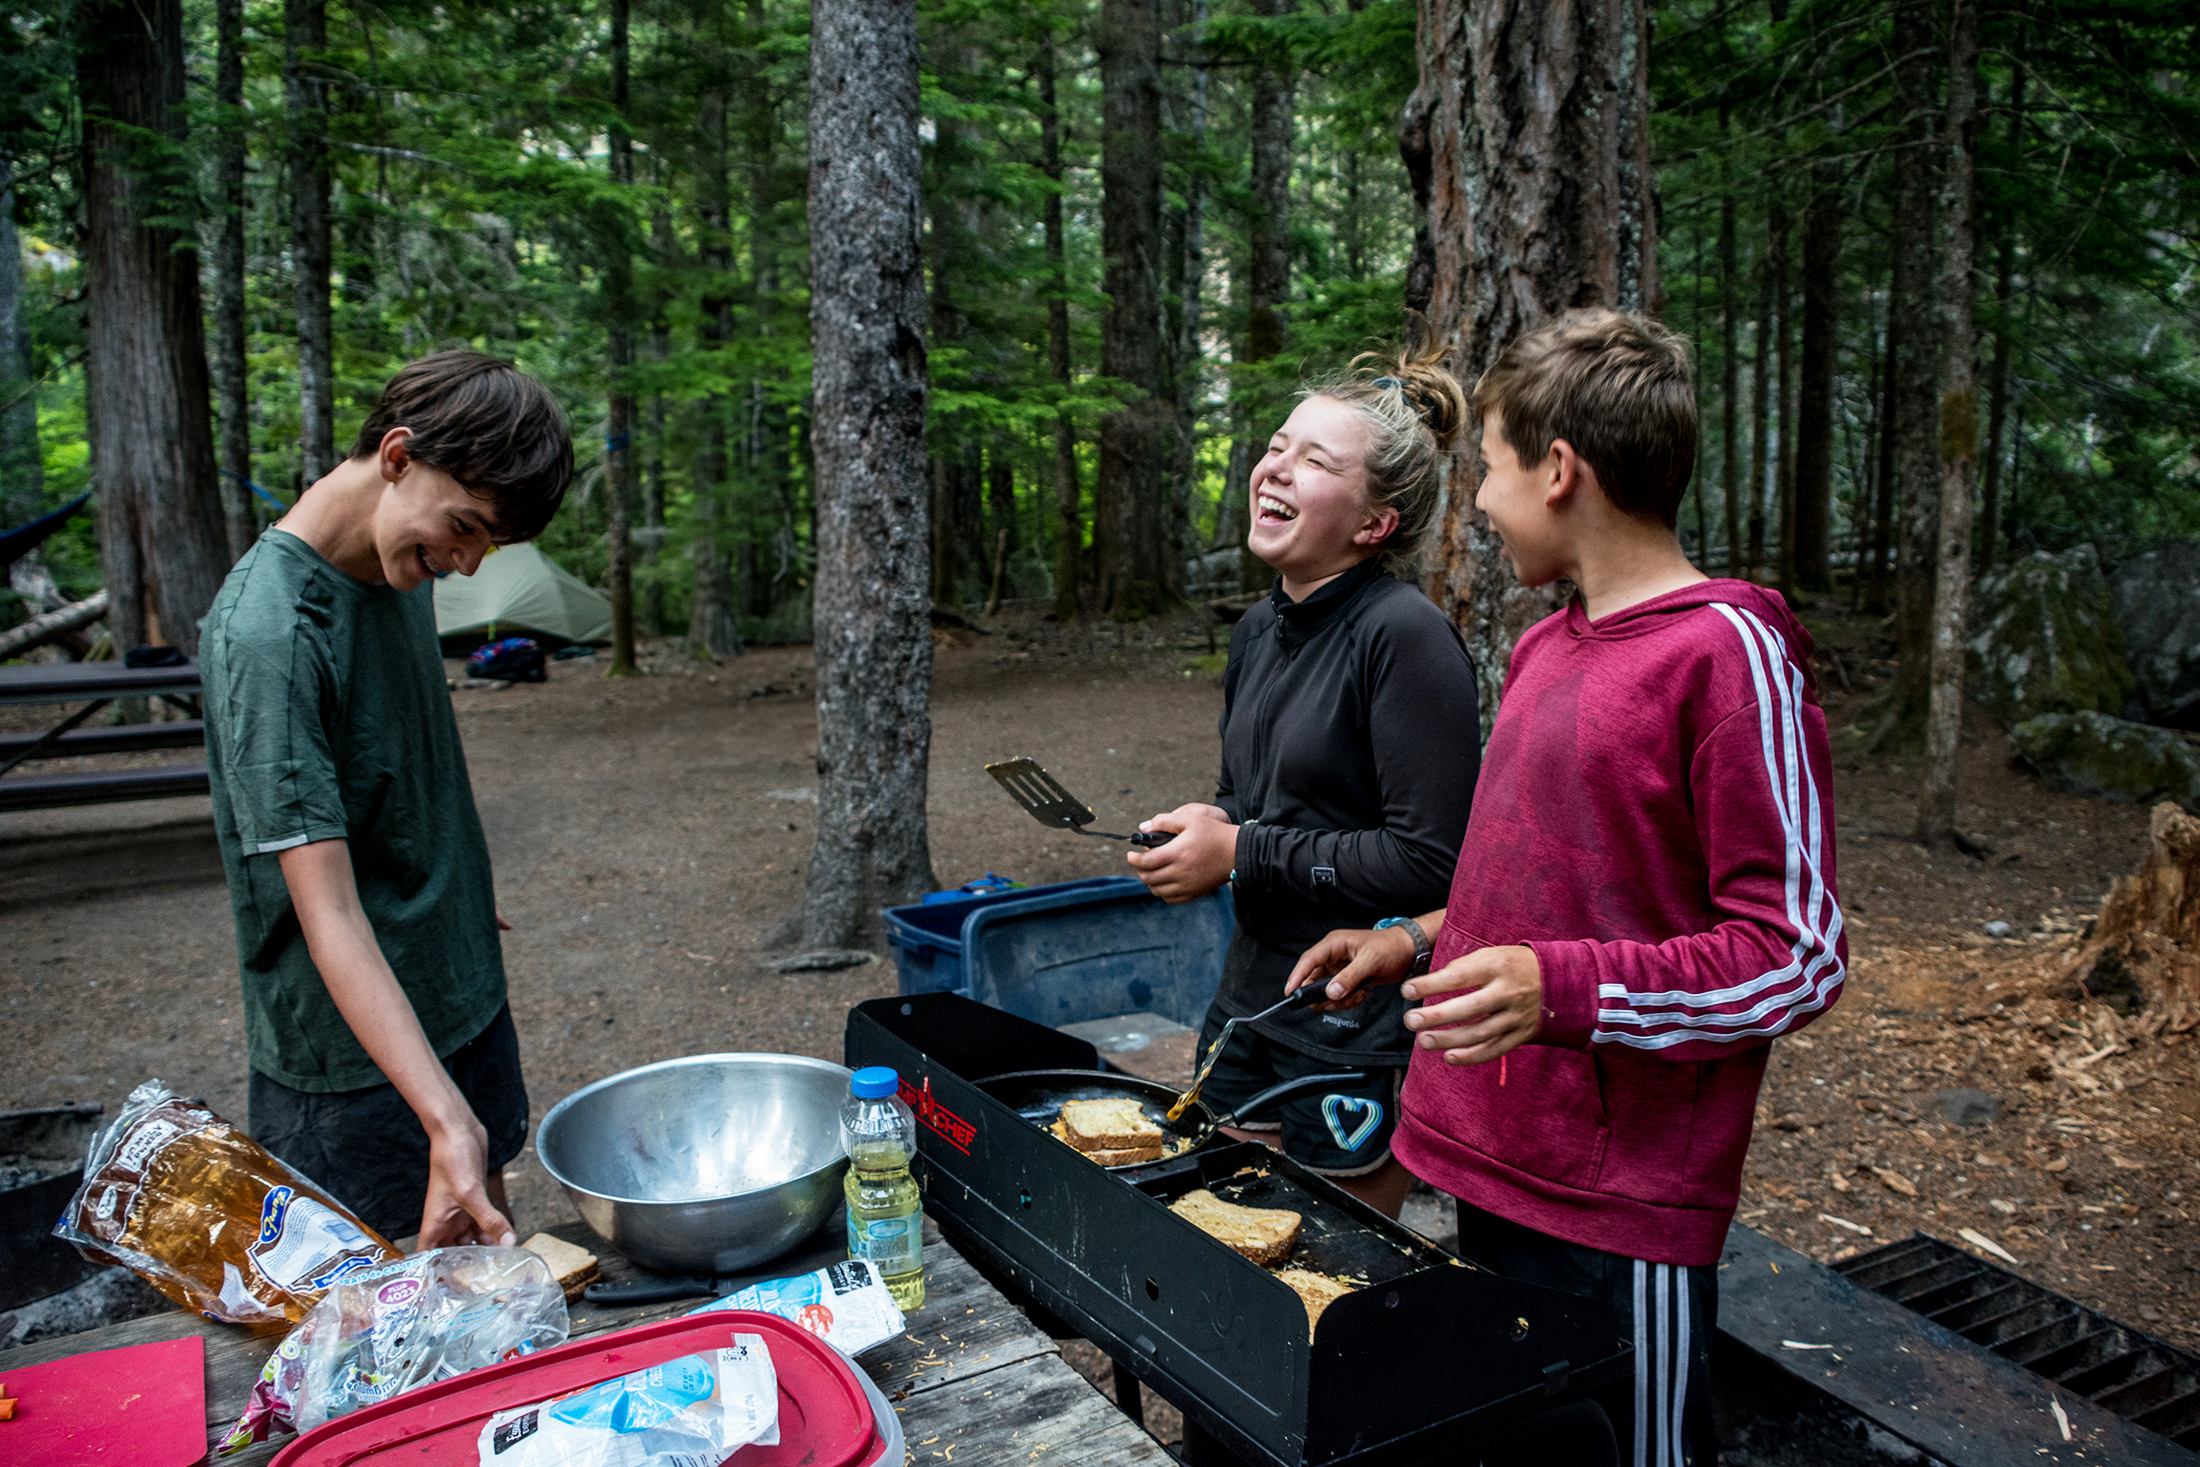 Thee people cooking french toast at a camp stove and laughing.